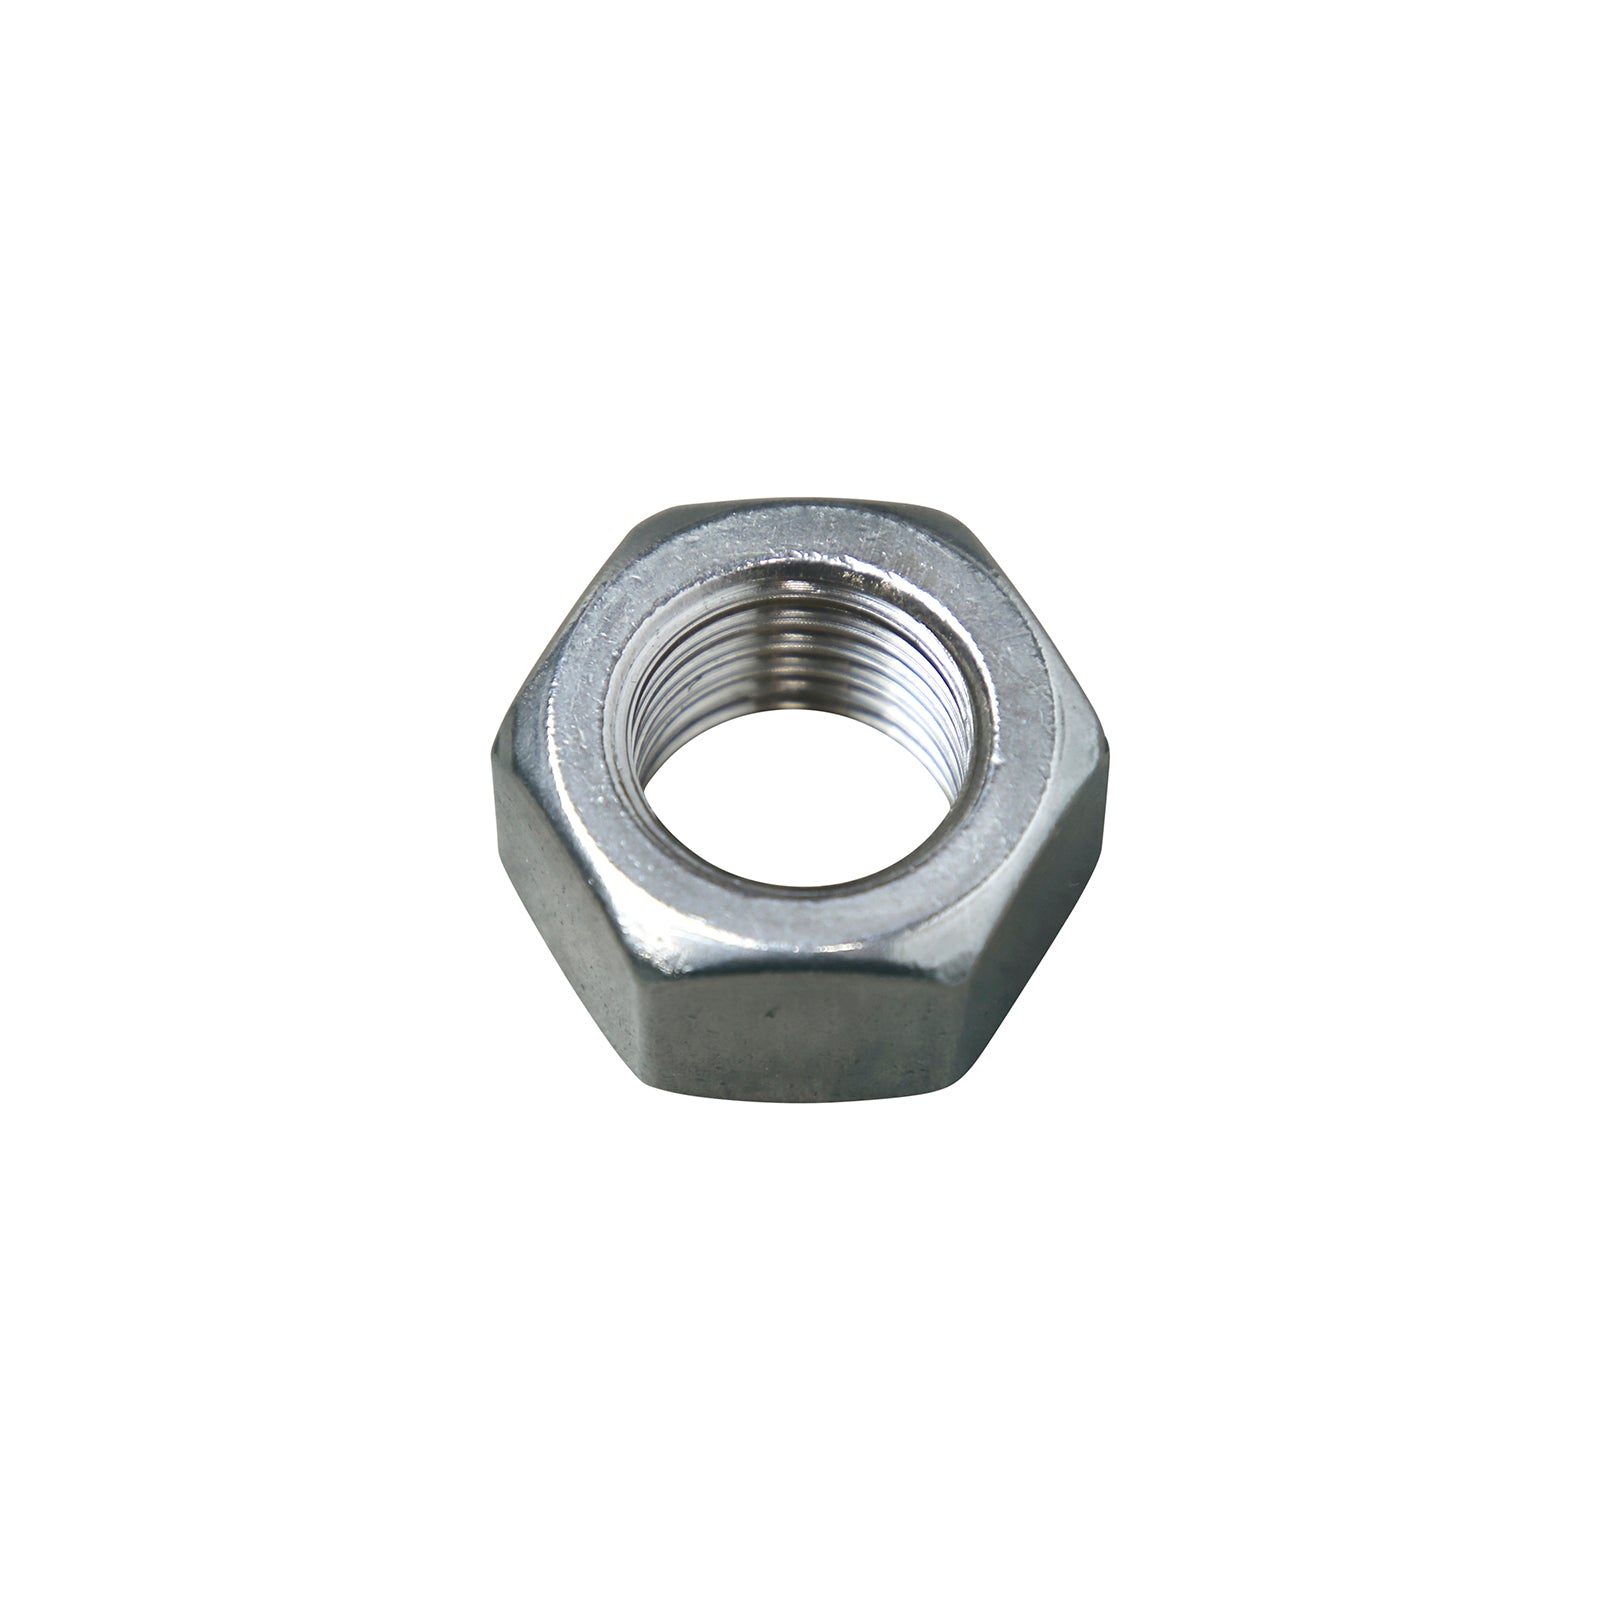 1"-8 Conquest Hex Nut - 304 Stainless Steel